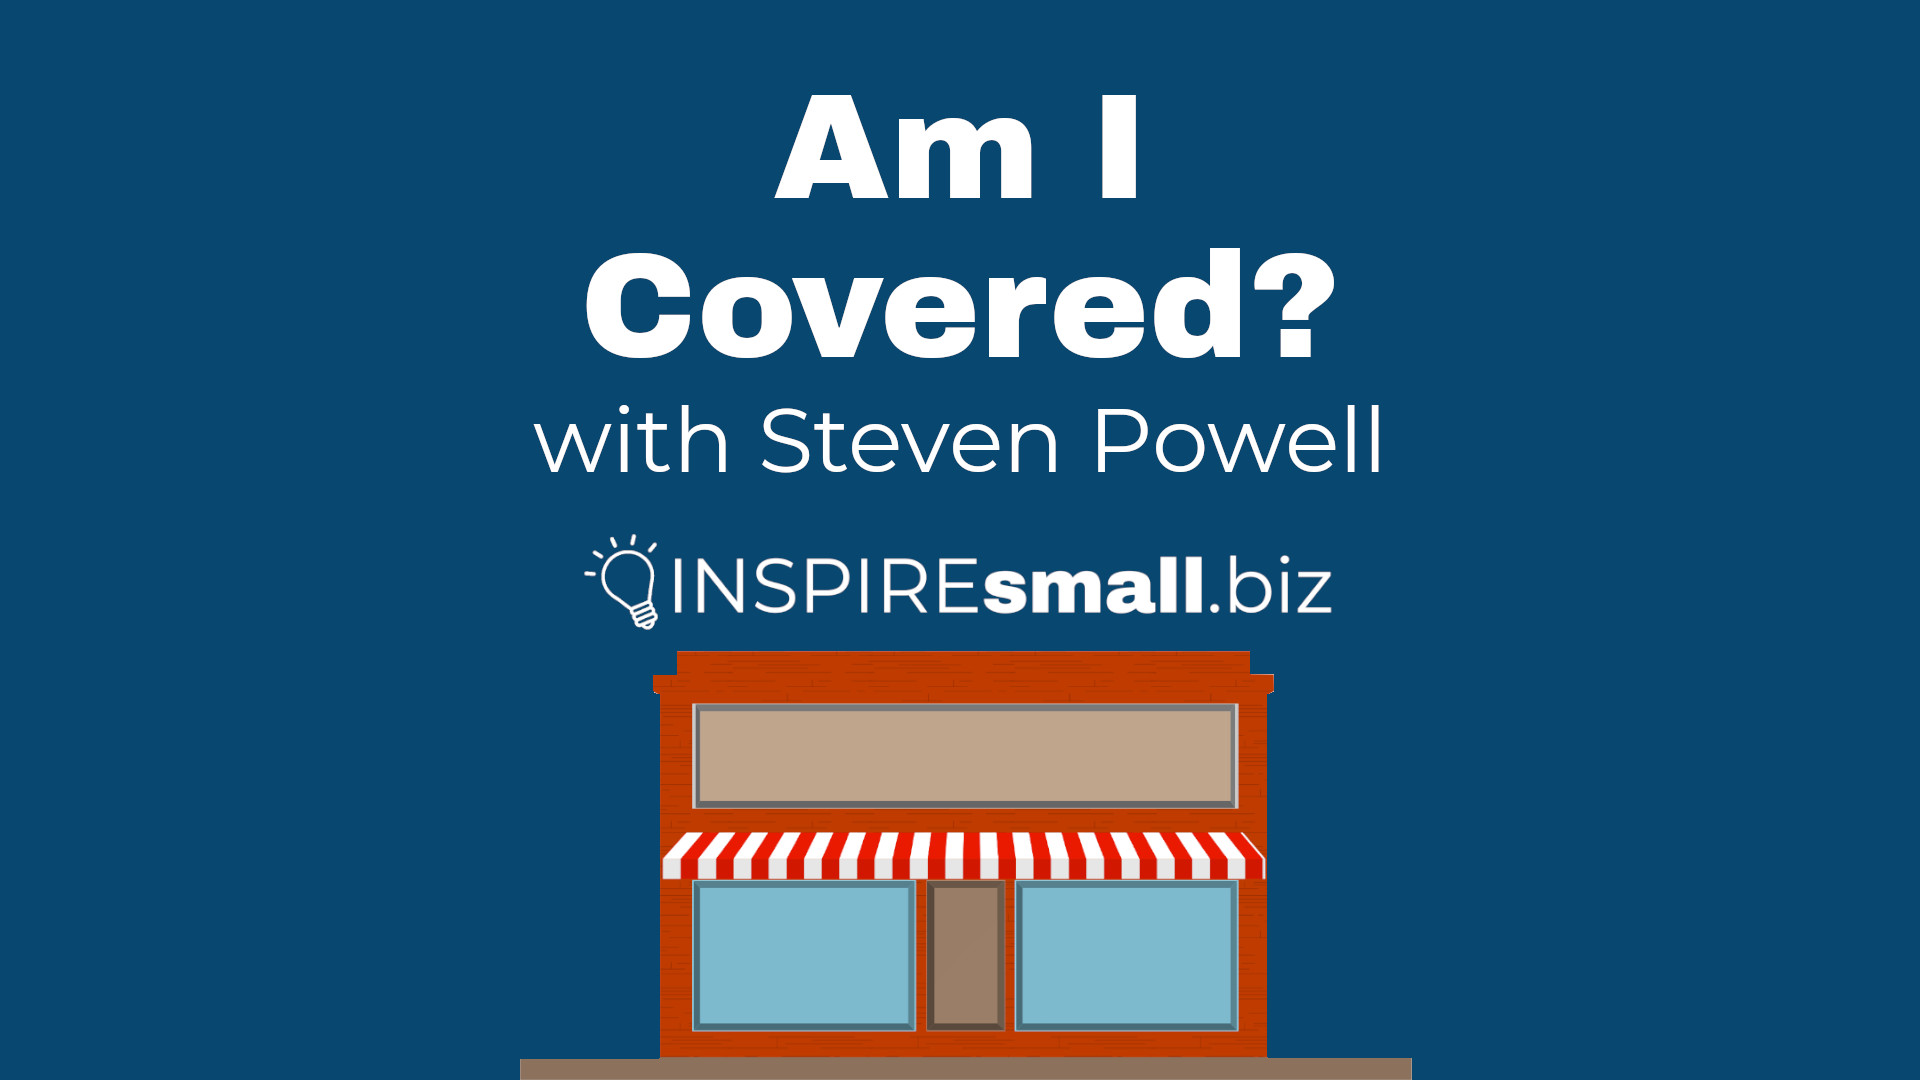 picture of a small business storefront with the words 'am I covered' written above on a blue background